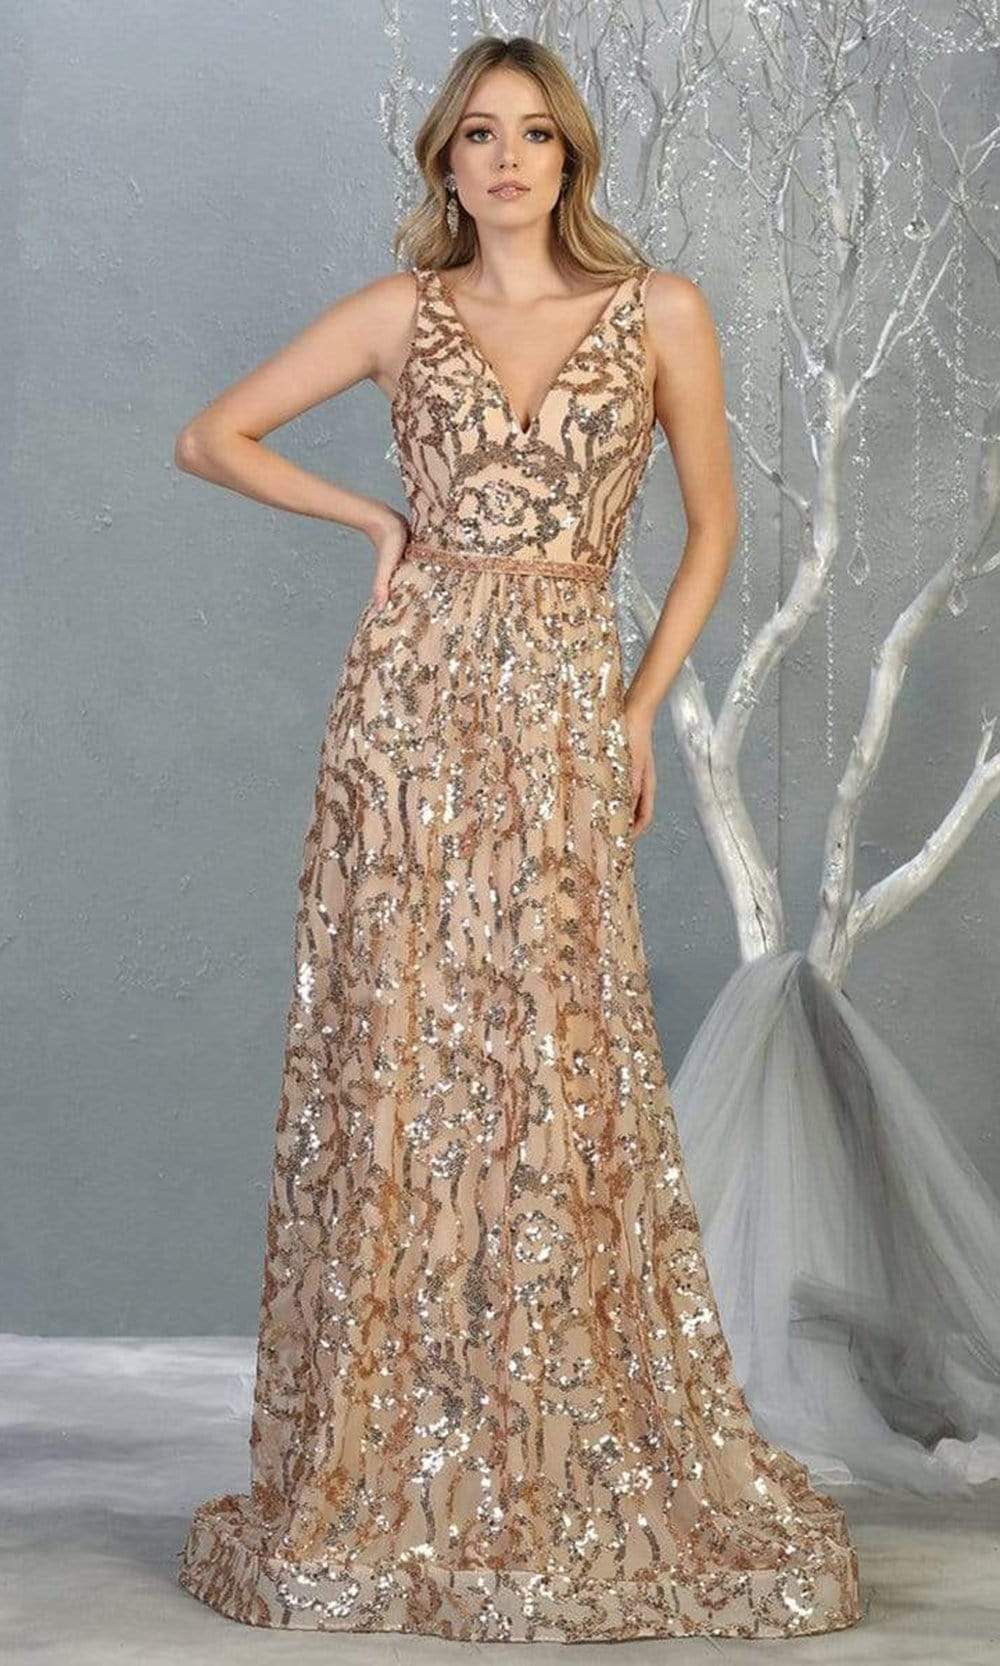 May Queen - RQ7866 Embellished V-neck A-line Gown Evening Dresses 4 / Rosegold